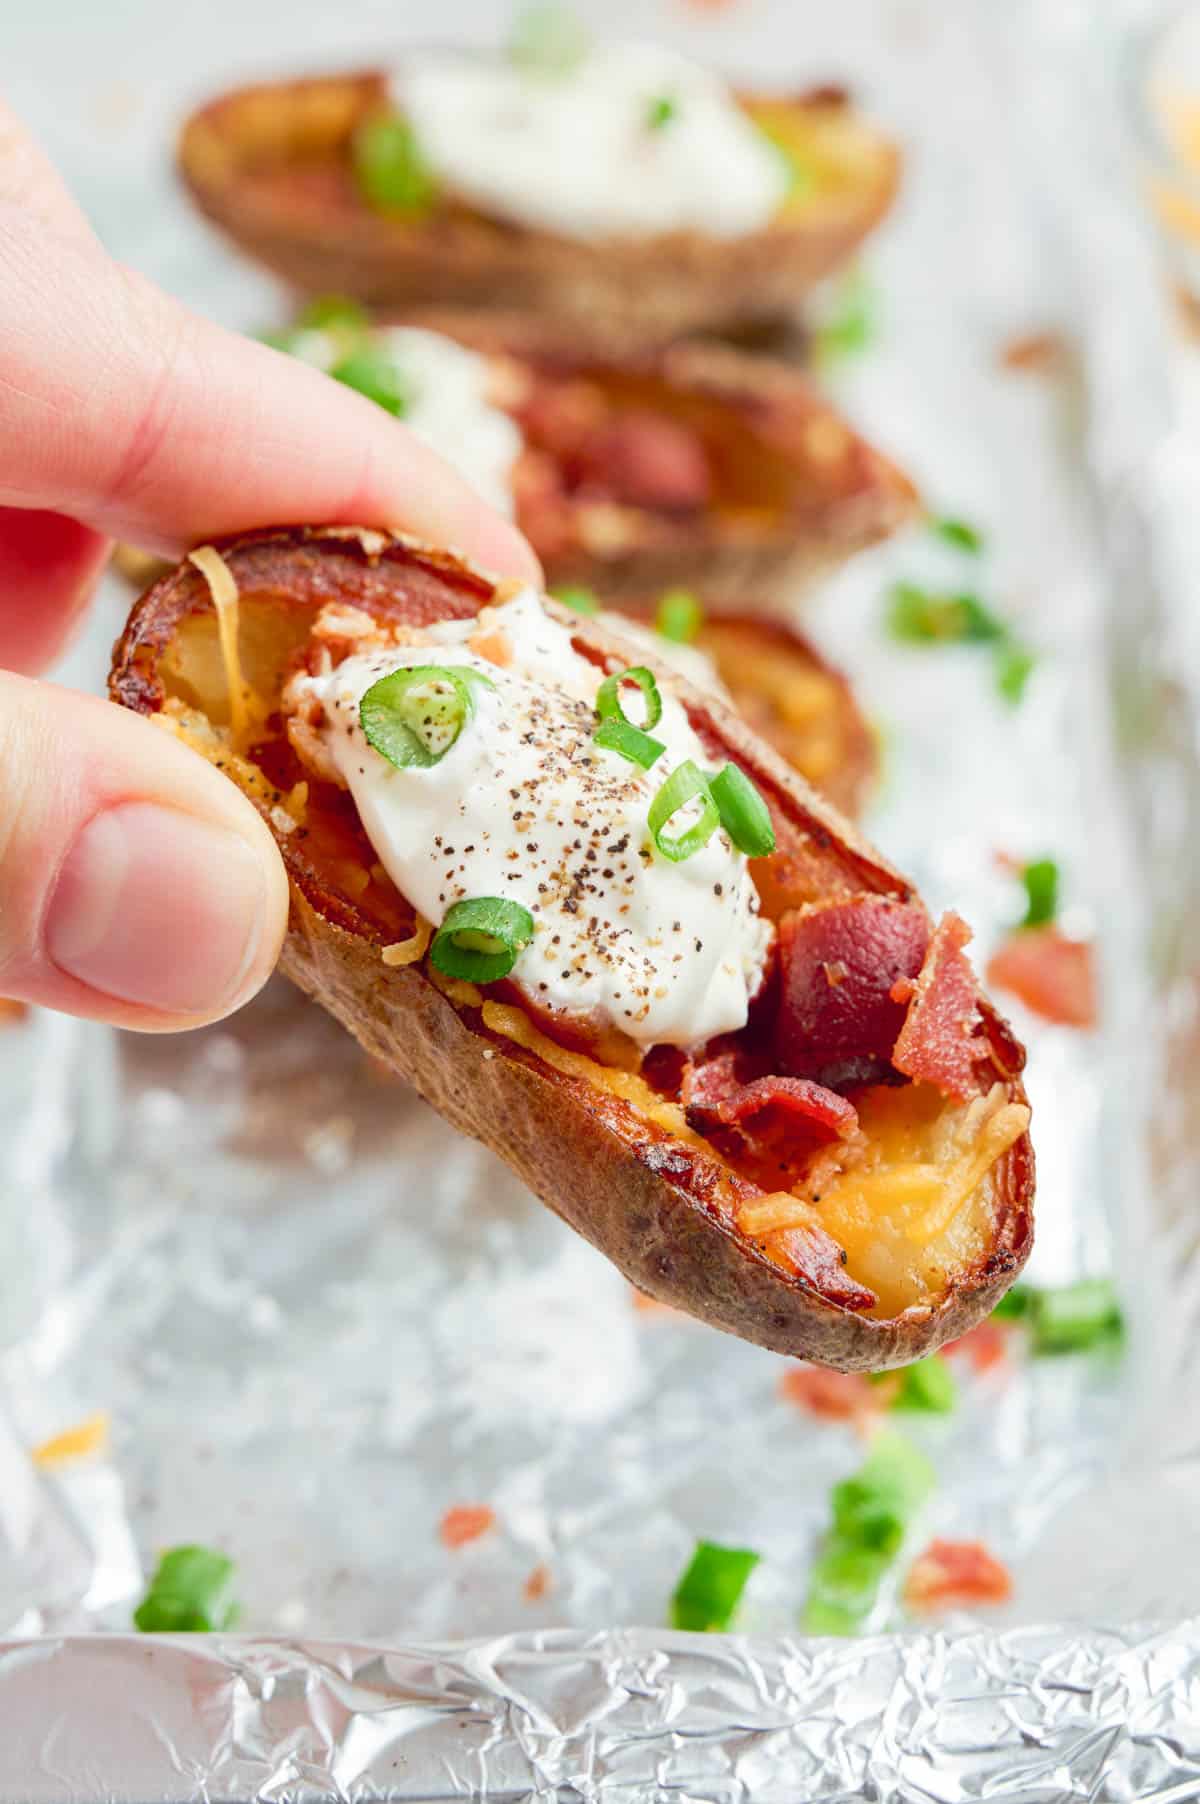 A hand holds a potato skin topped with sour cream and chives.